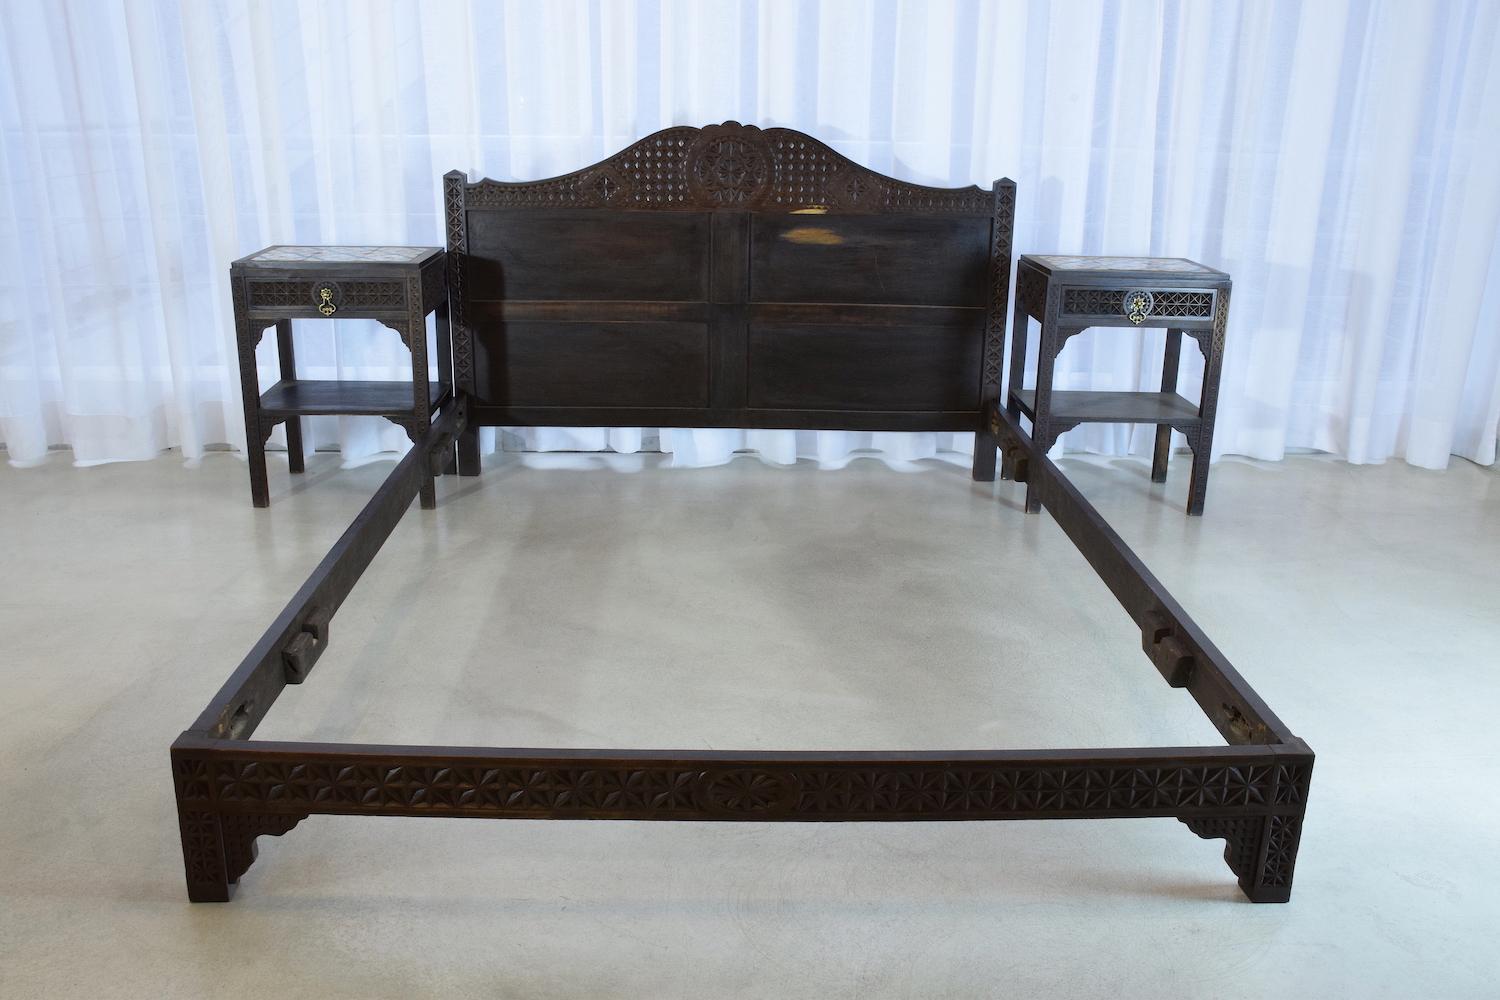 1930s bed